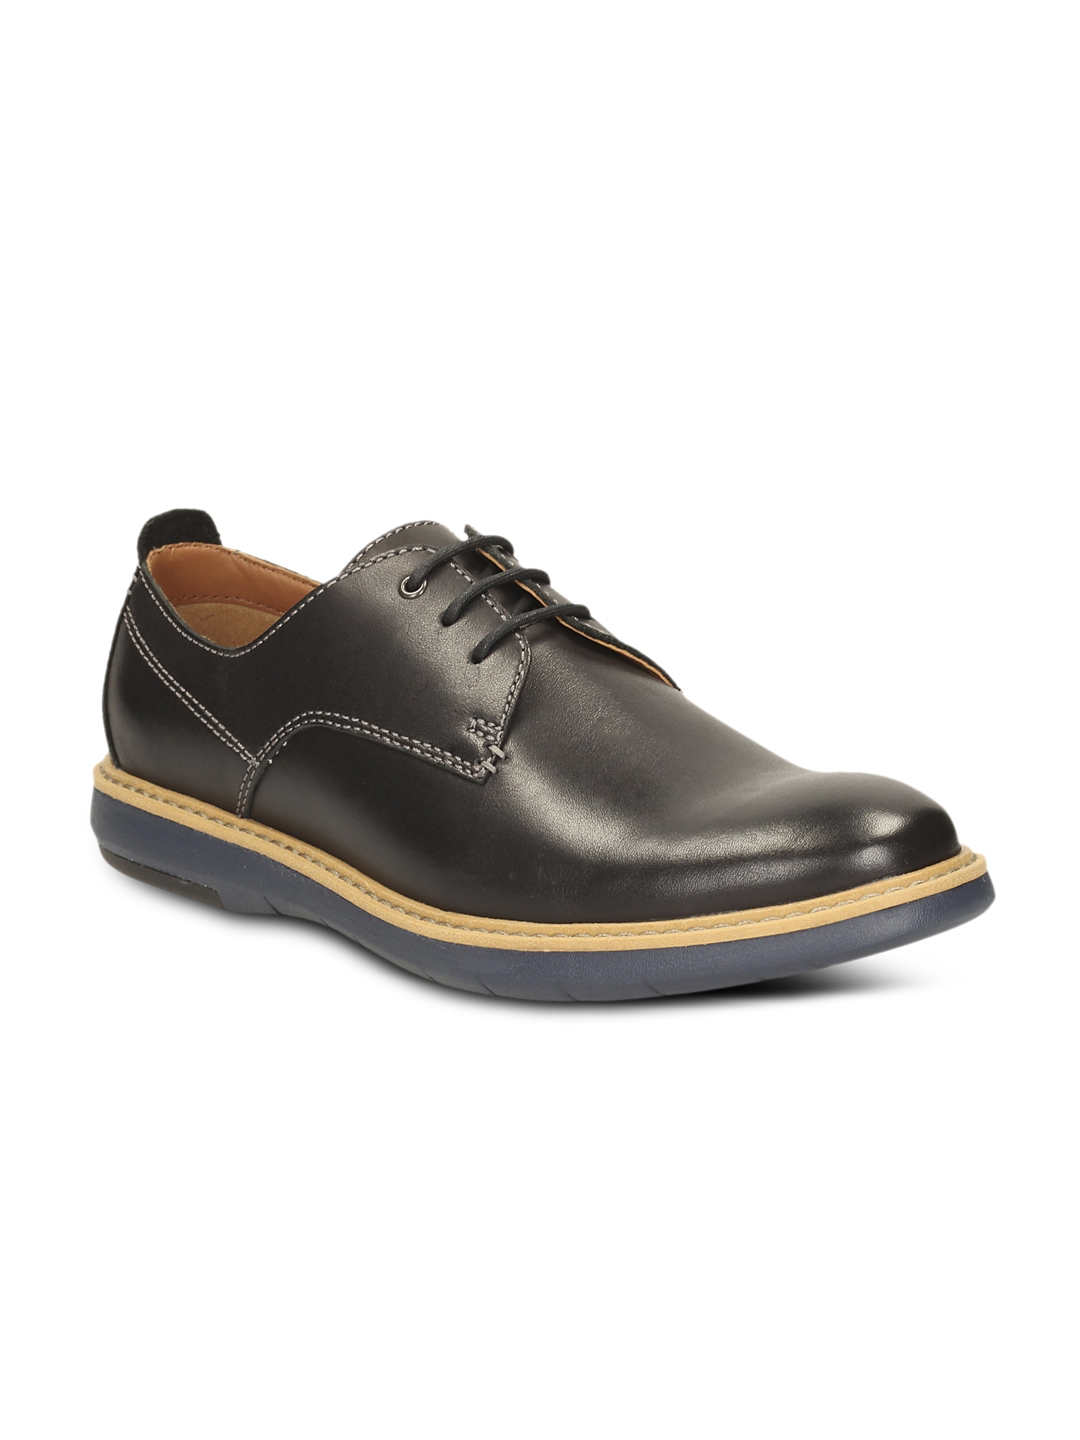 Buy Clarks Men Black Casual Shoes - Casual Shoes for Men 1698519 | Myntra